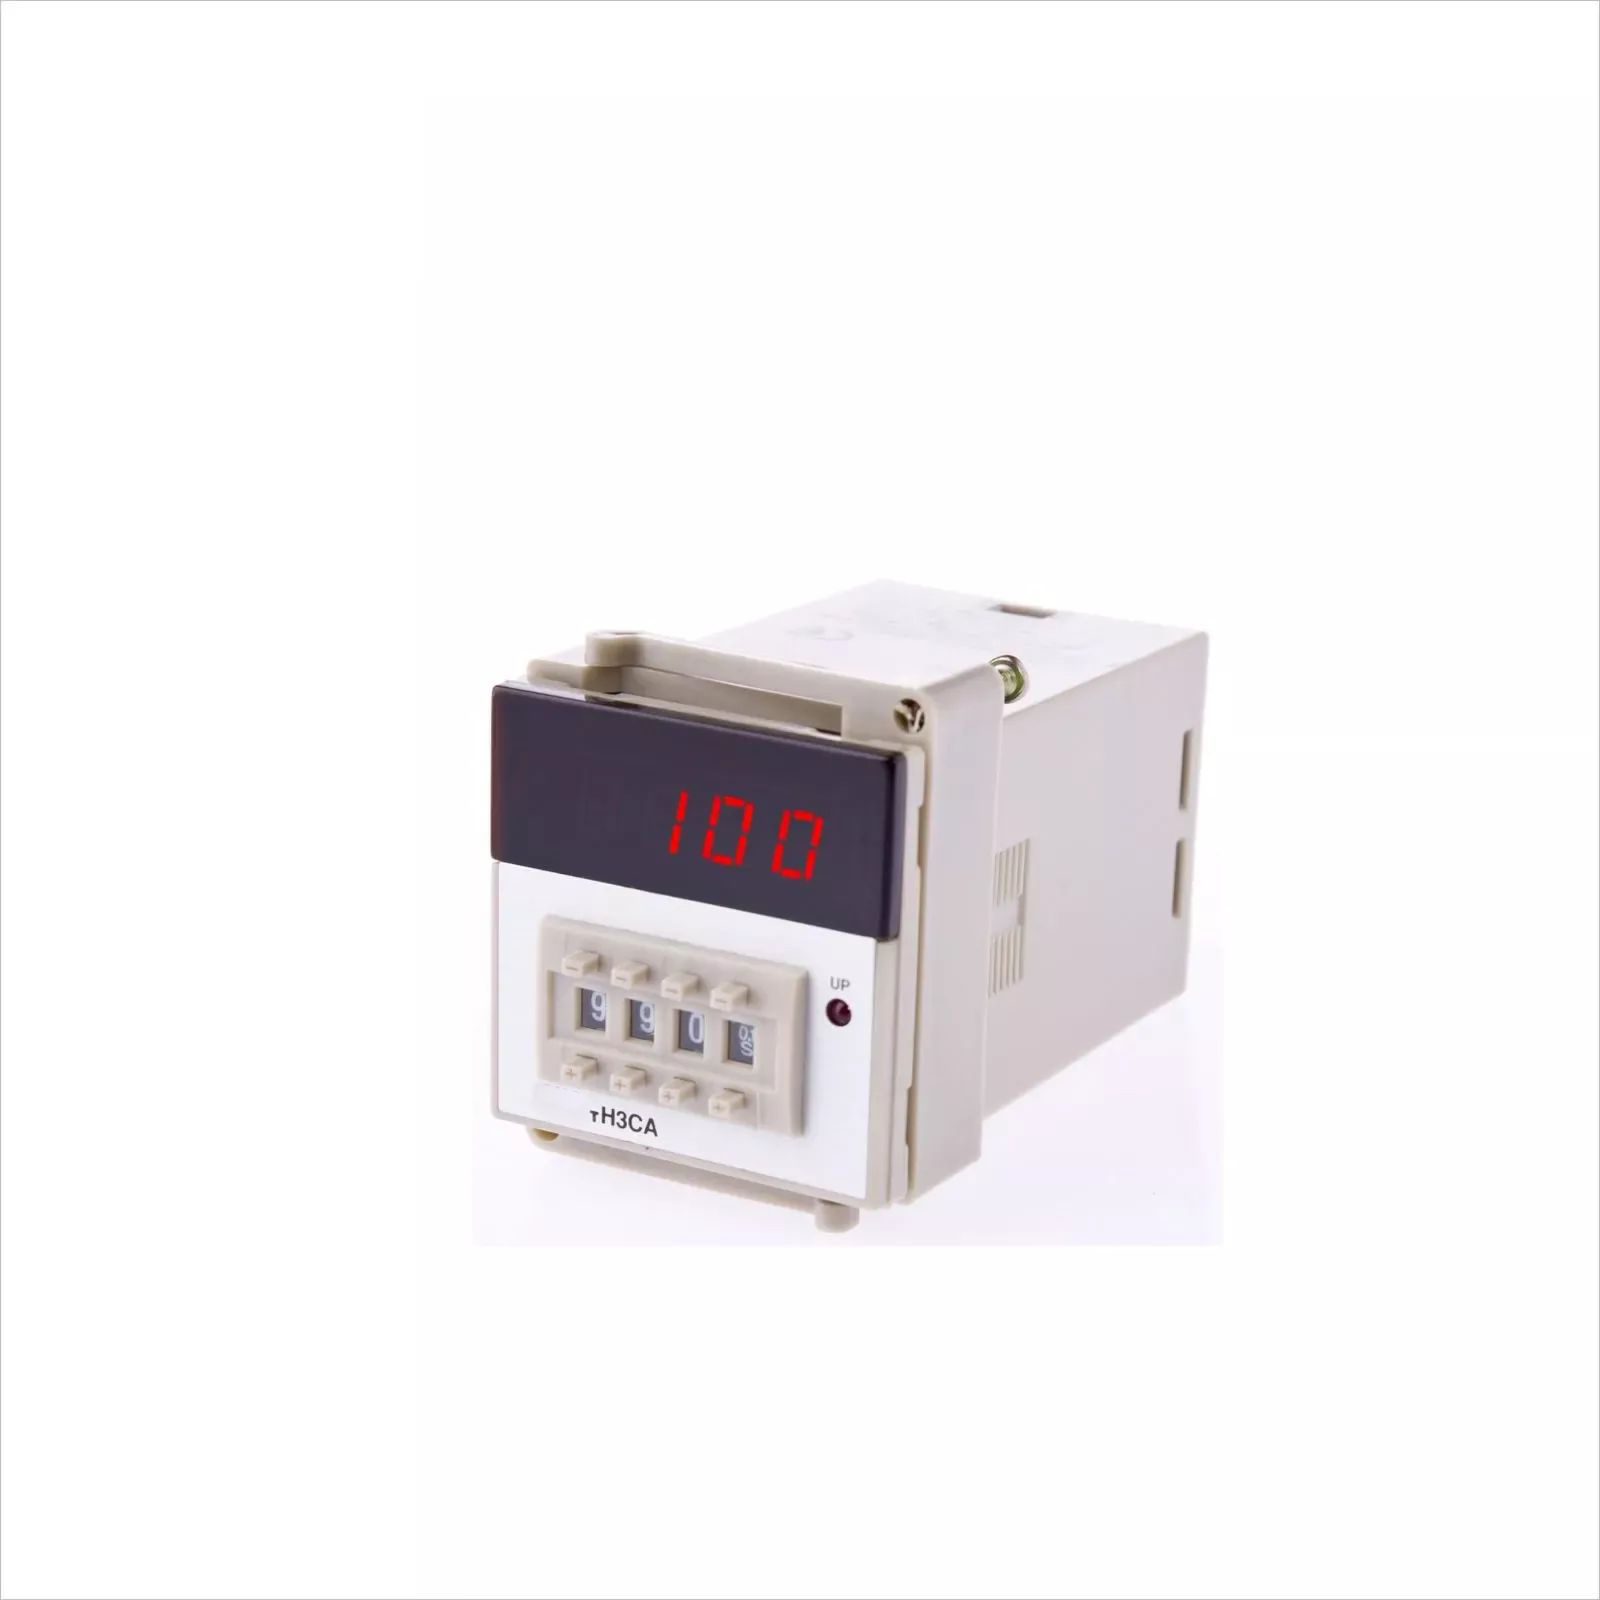 TH3CA Mini Four digits Industrial Electric LED digital Display Timer Relay with dial code